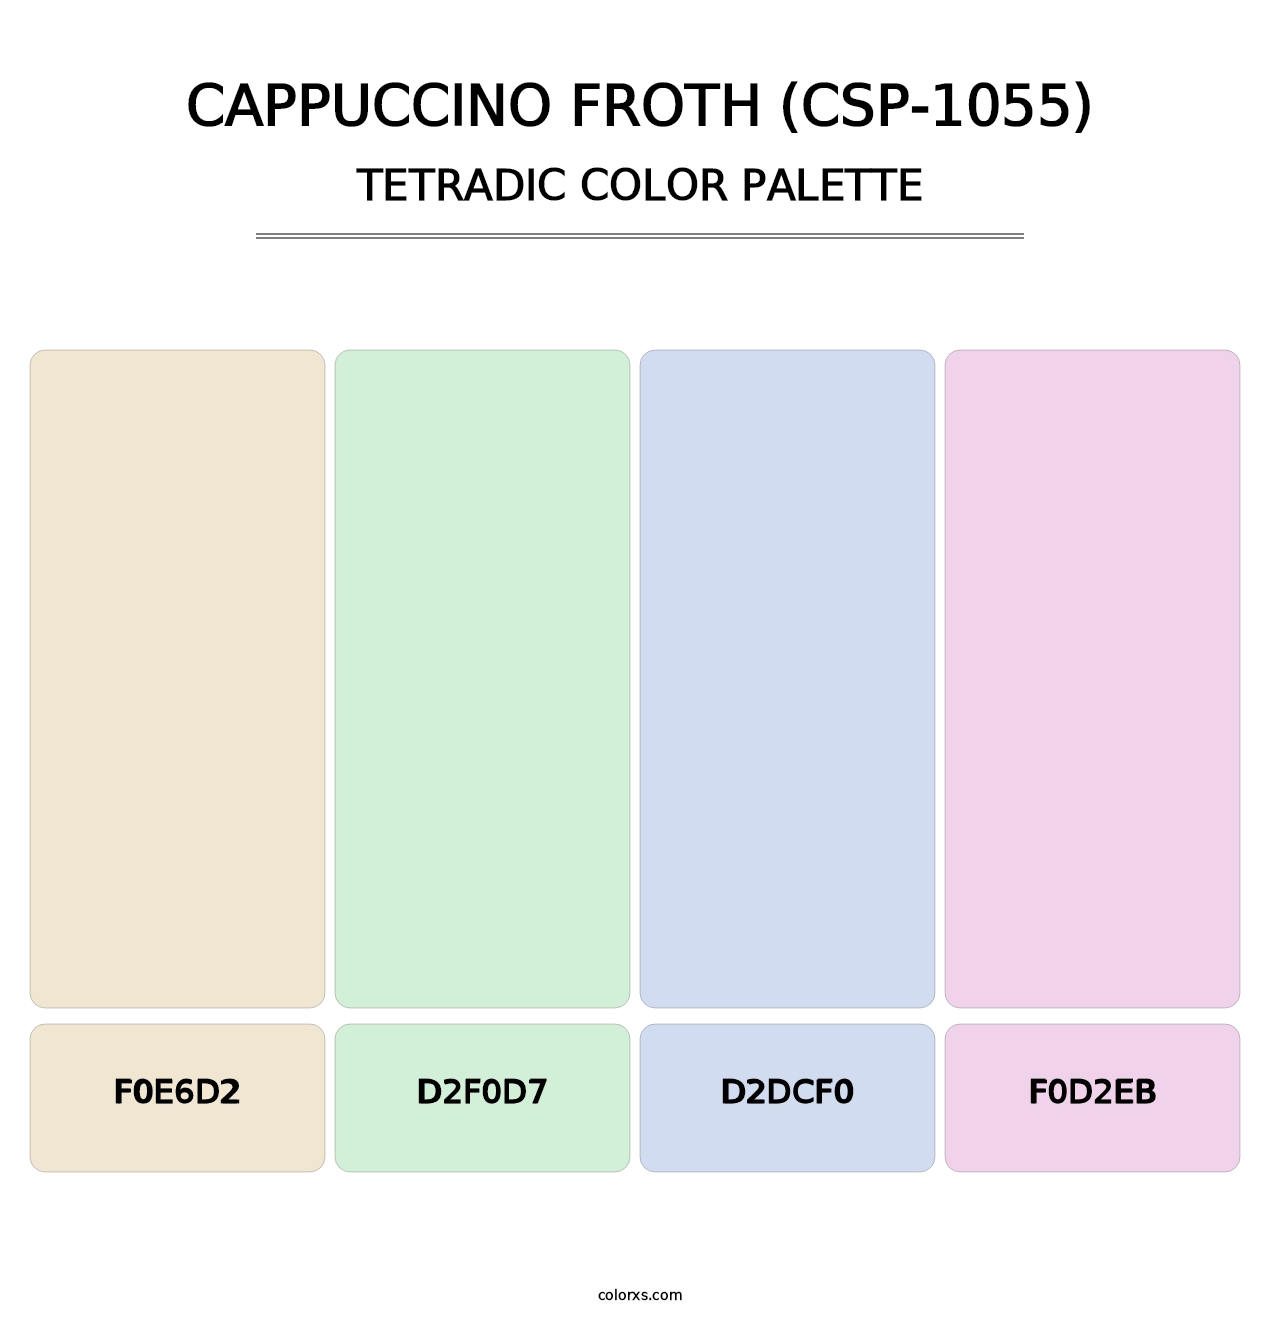 Cappuccino Froth (CSP-1055) - Tetradic Color Palette